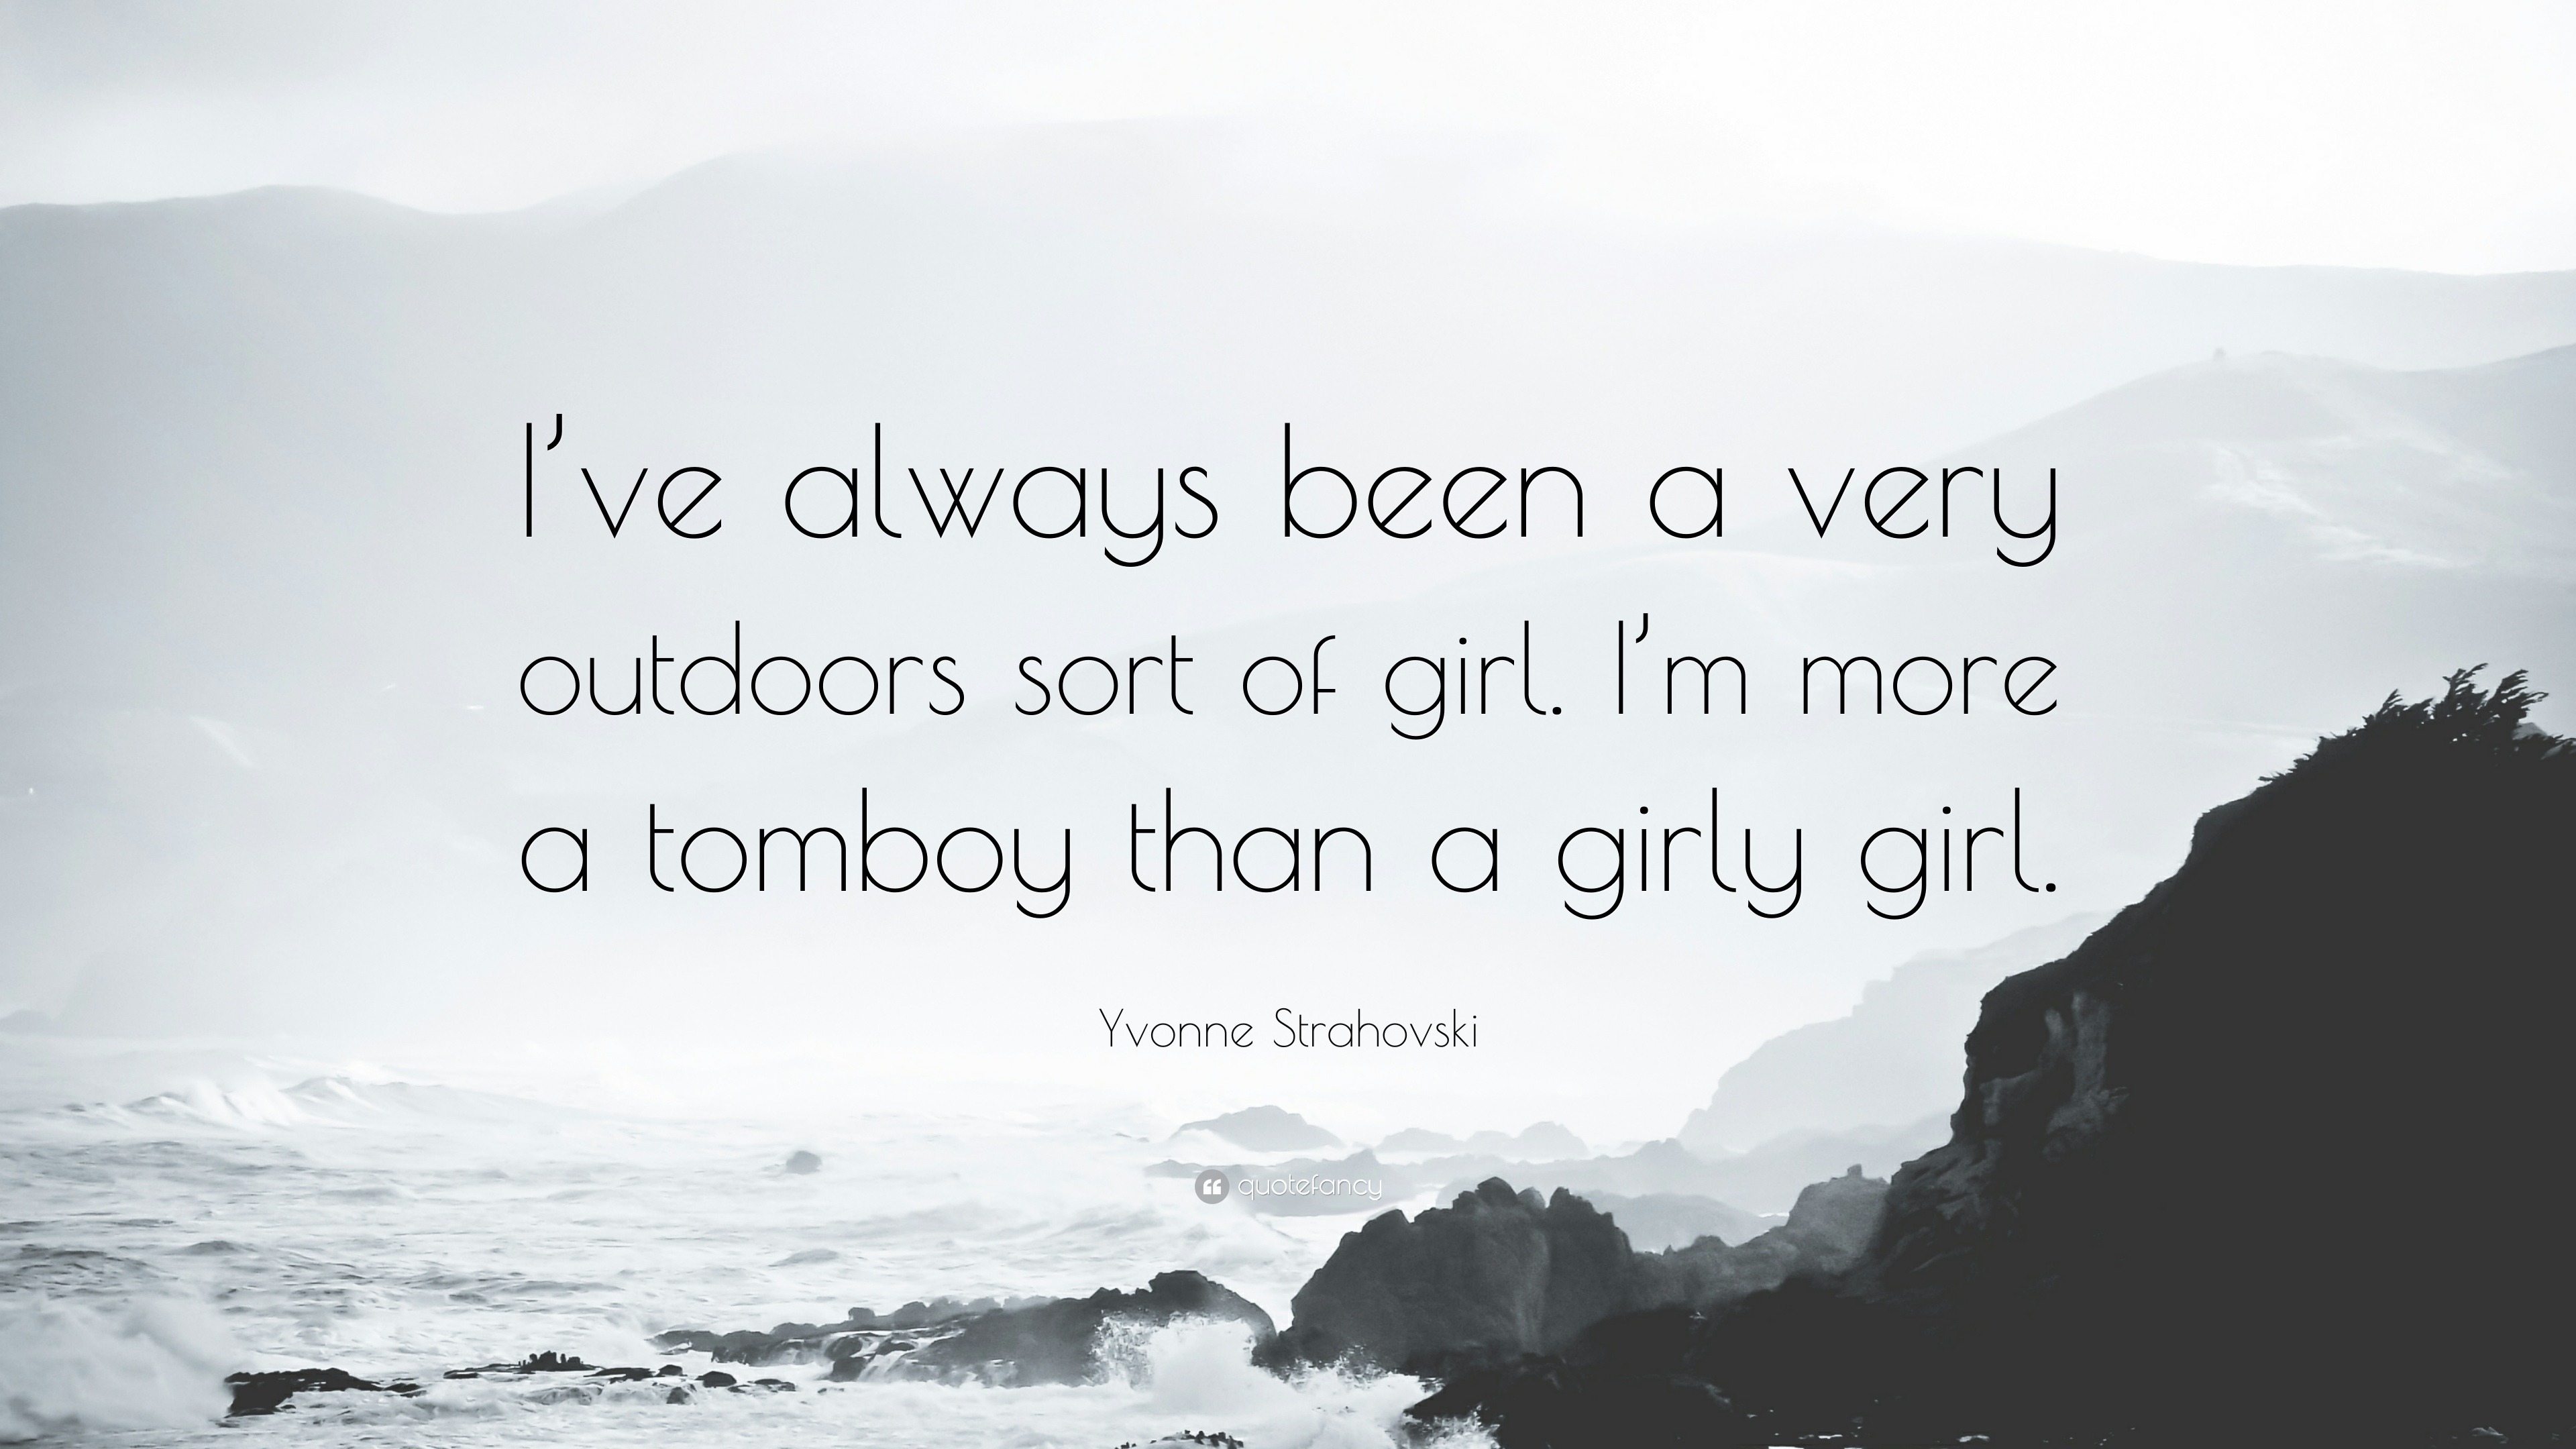 Yvonne Strahovski Quote: “I’ve always been a very outdoors sort of girl ...